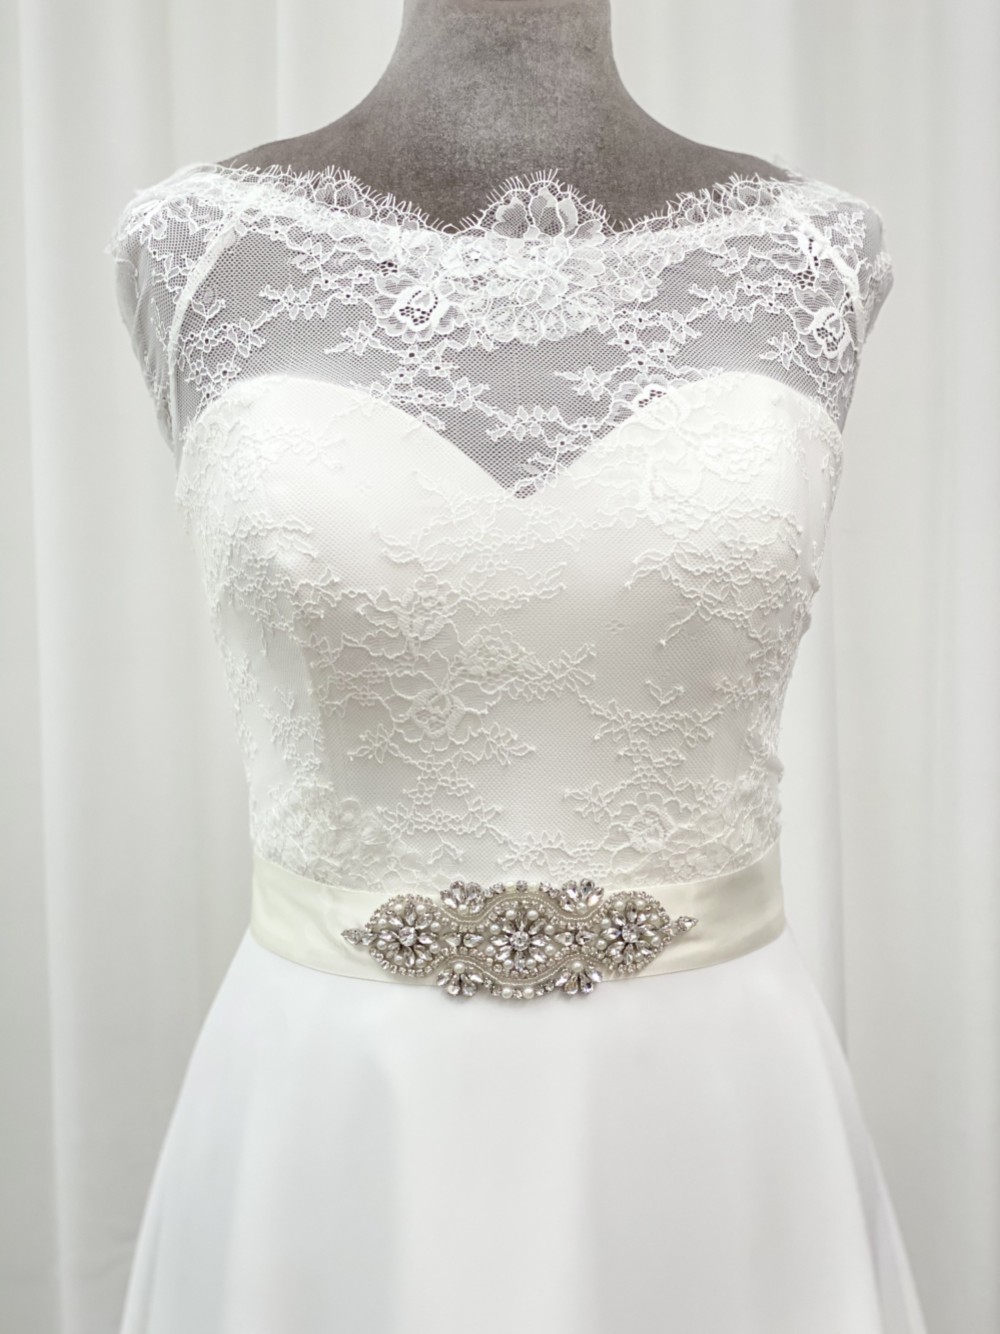 Photograph: Perfect Bridal Isla Floral Crystal, Pearl and Beaded Dress Belt